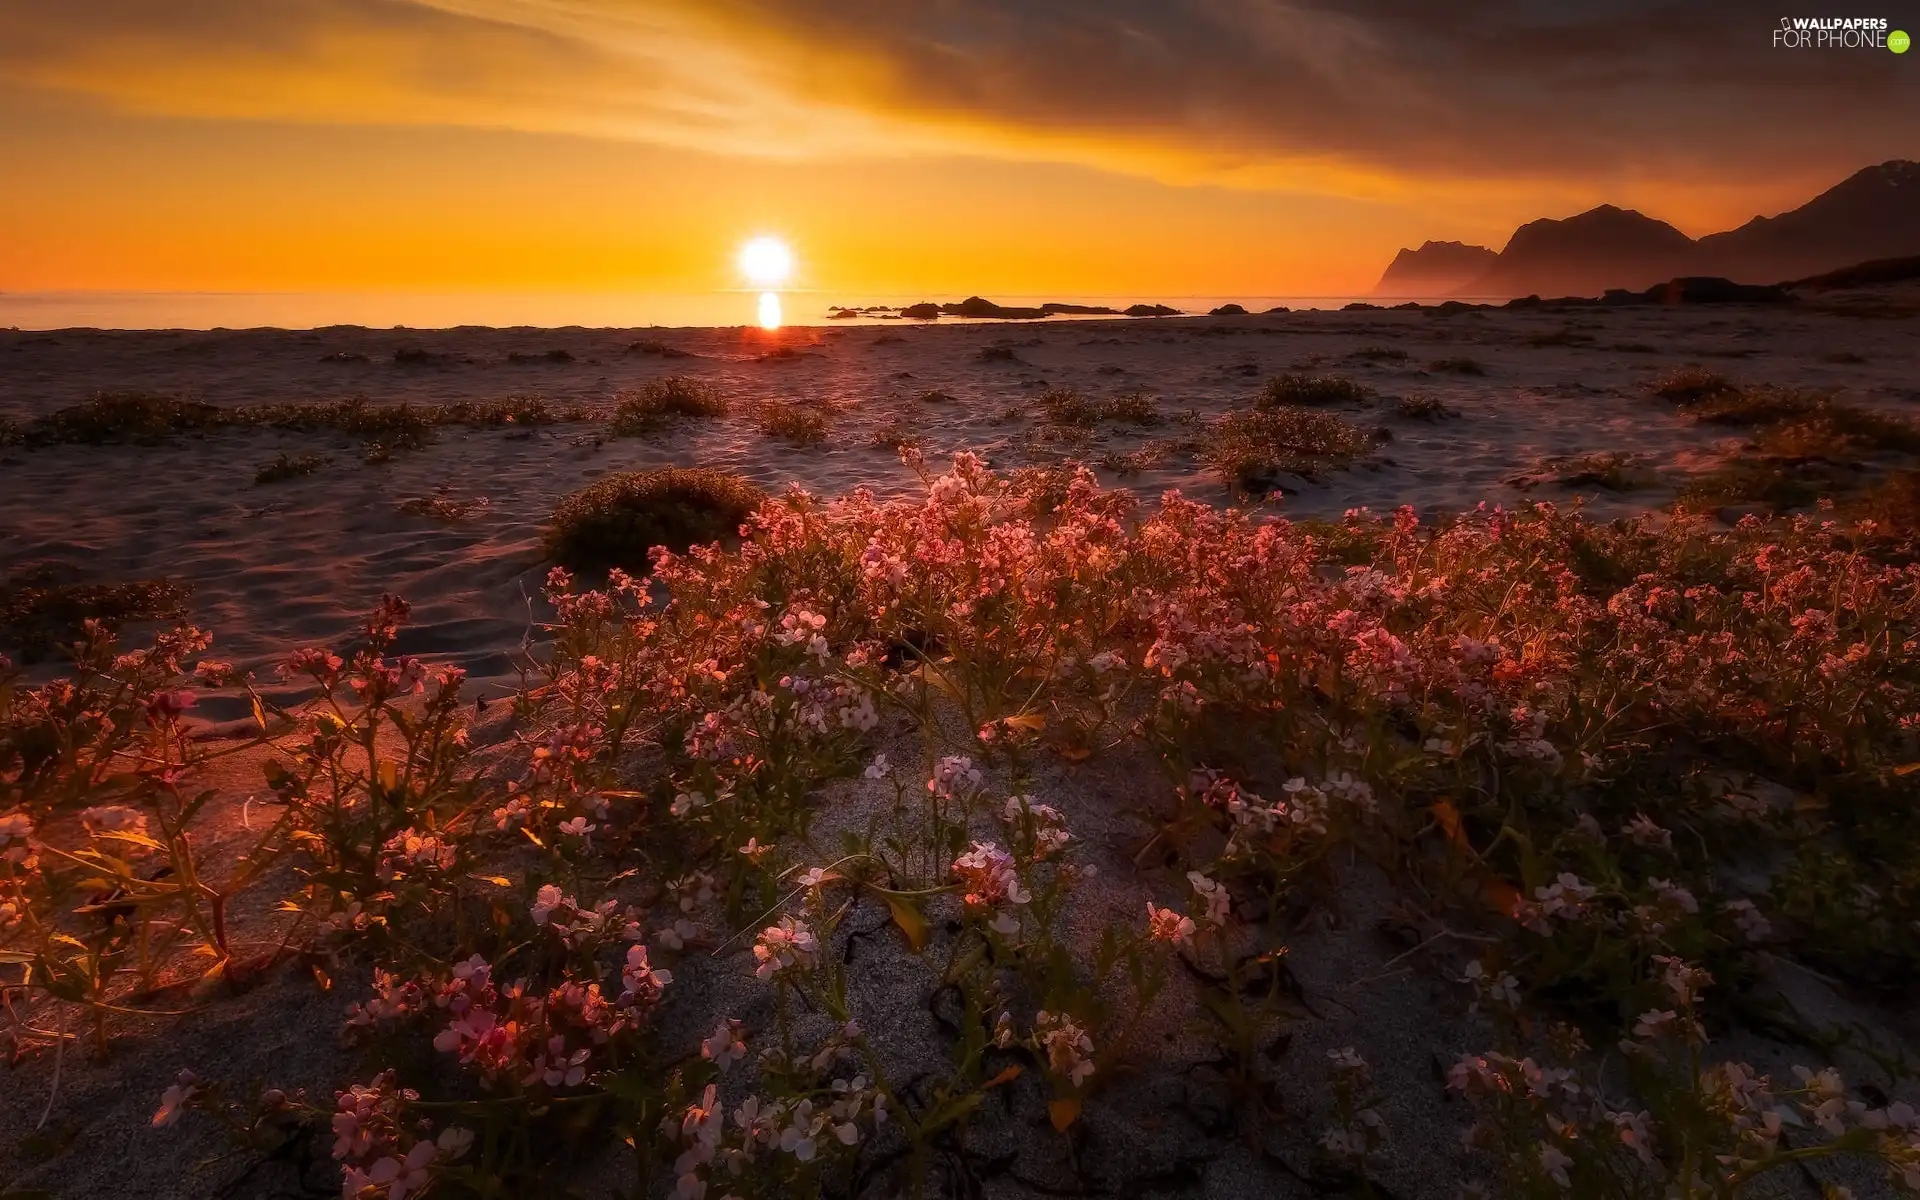 Plants, Flowers, Mountains, Beaches, Great Sunsets